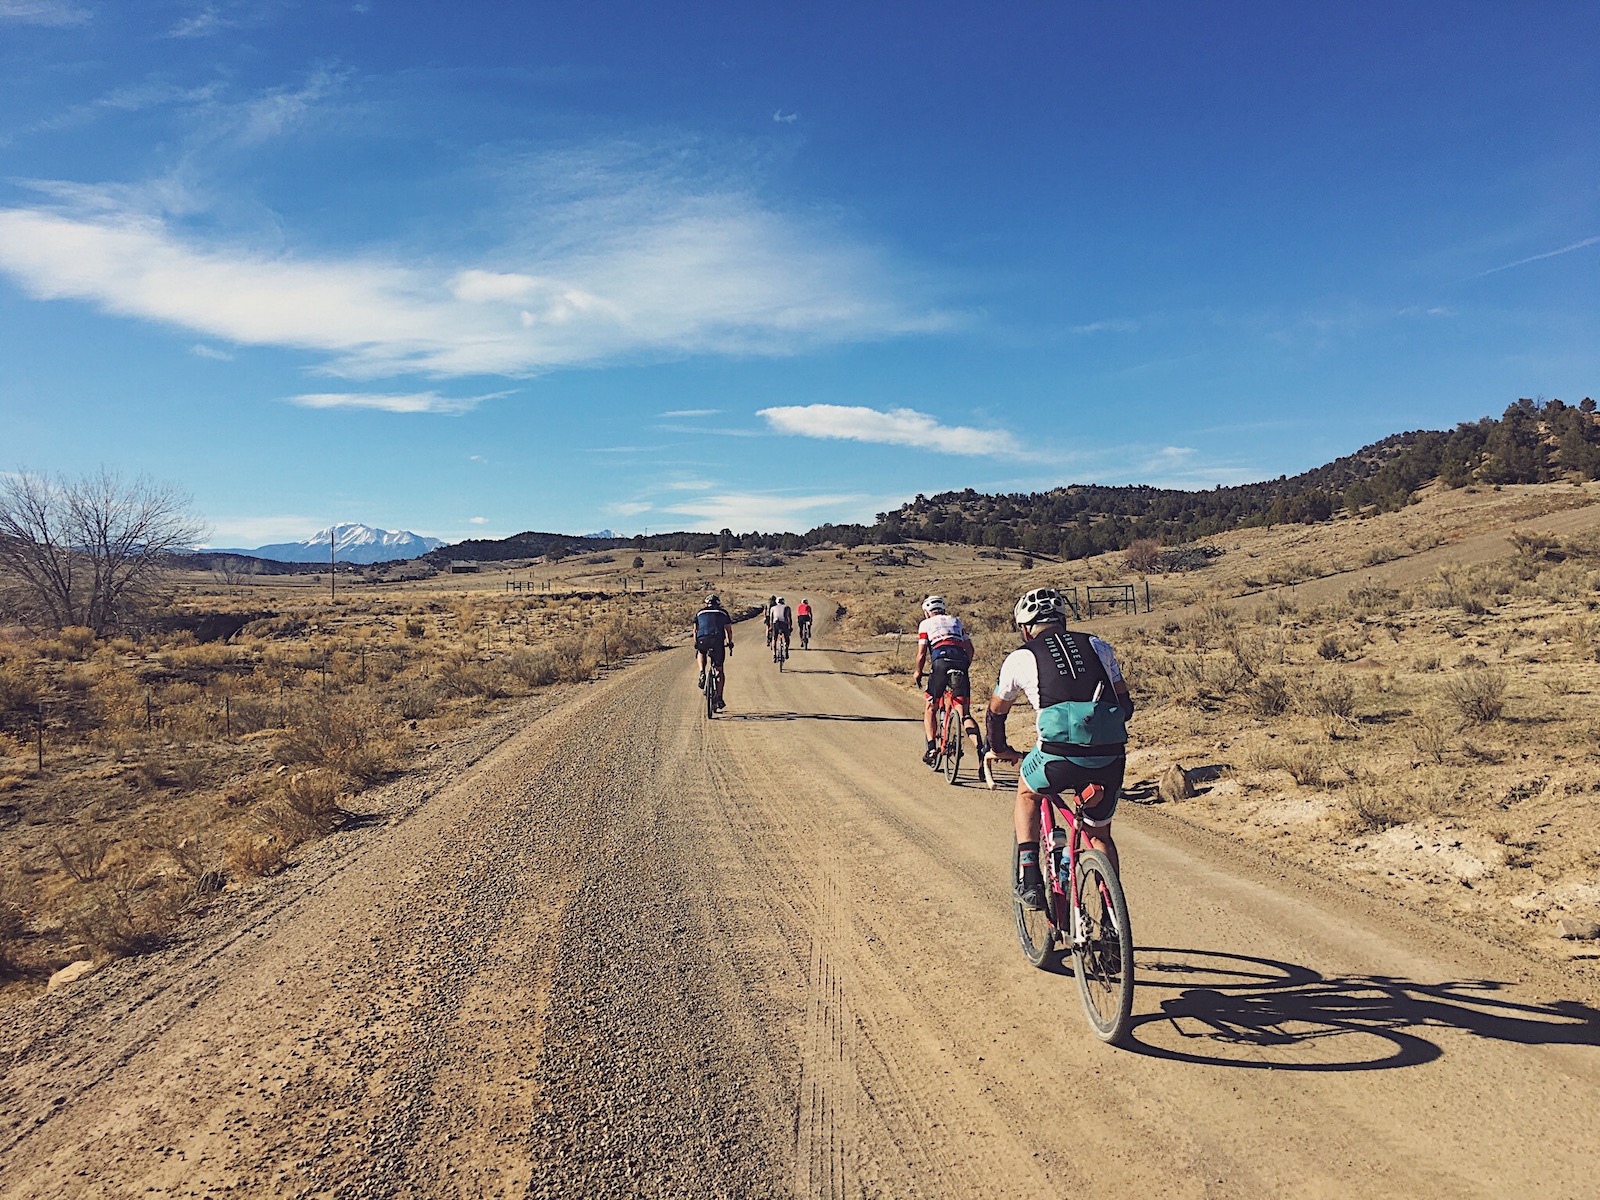 Riders on course in Fistful of Dirt Gravel